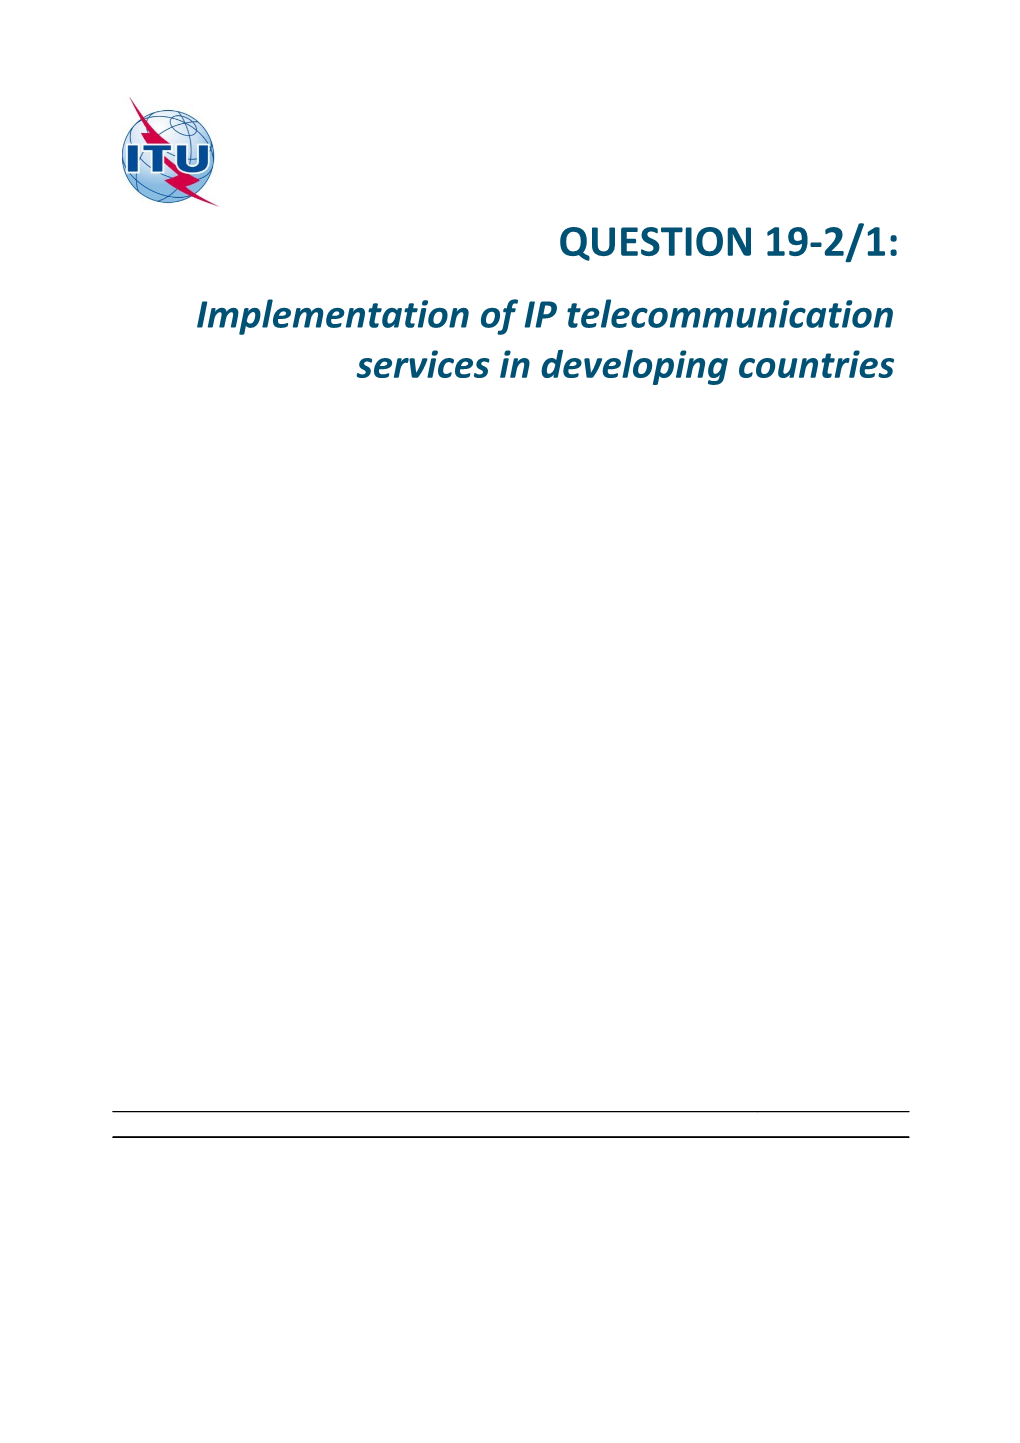 Implementation of IP Telecommunication Services in Developing Countries